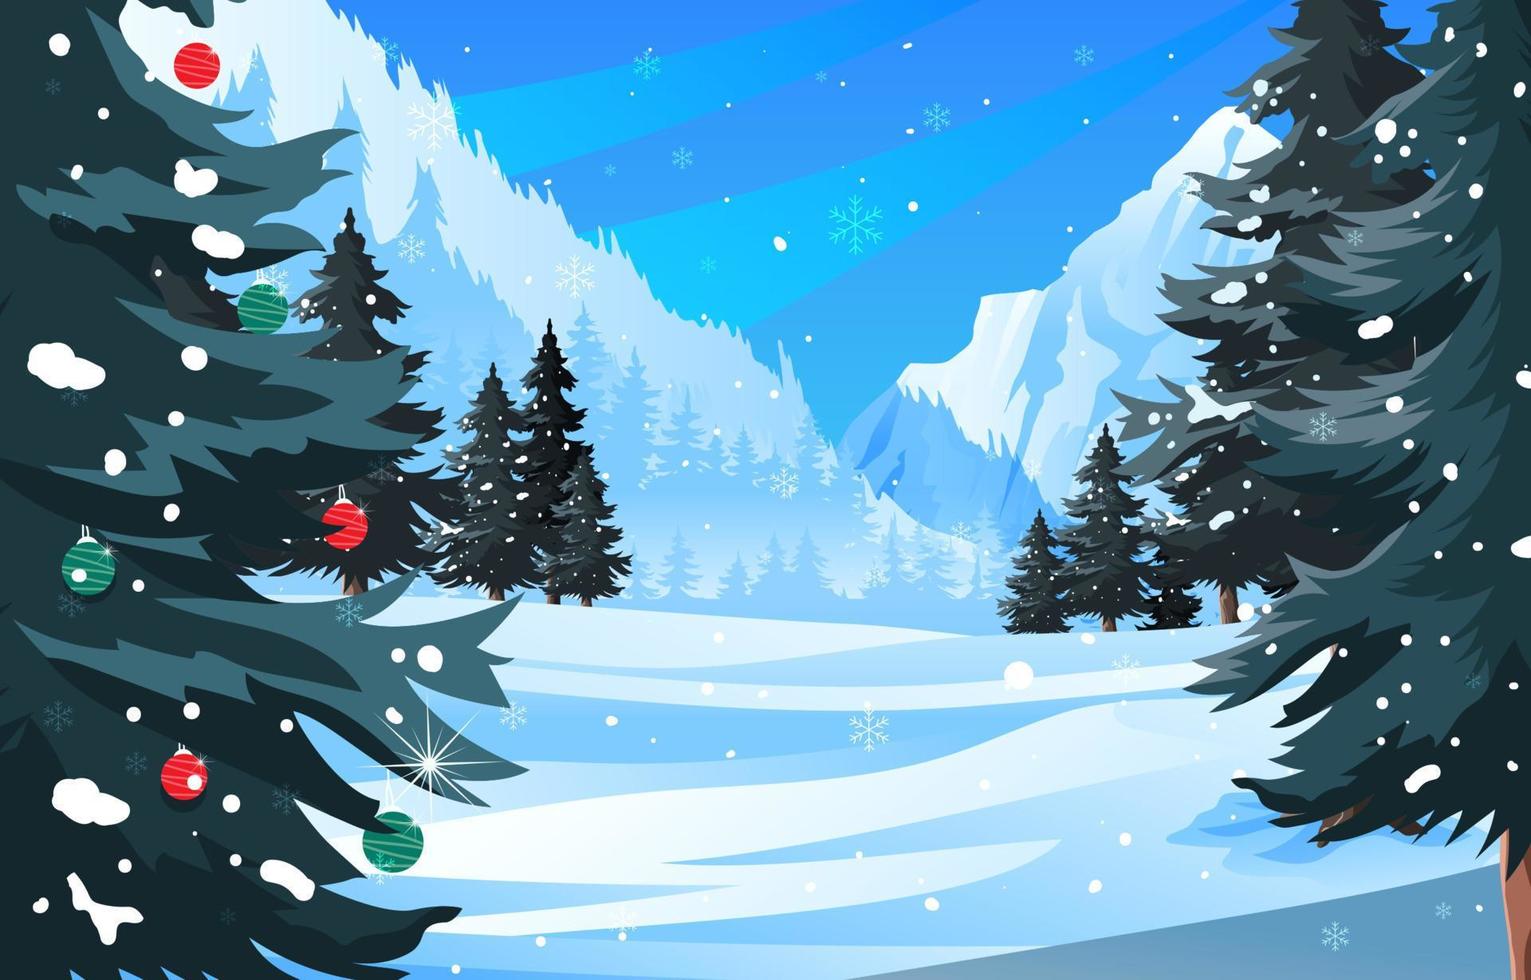 White Snowy Christmas Trees in Nature vector